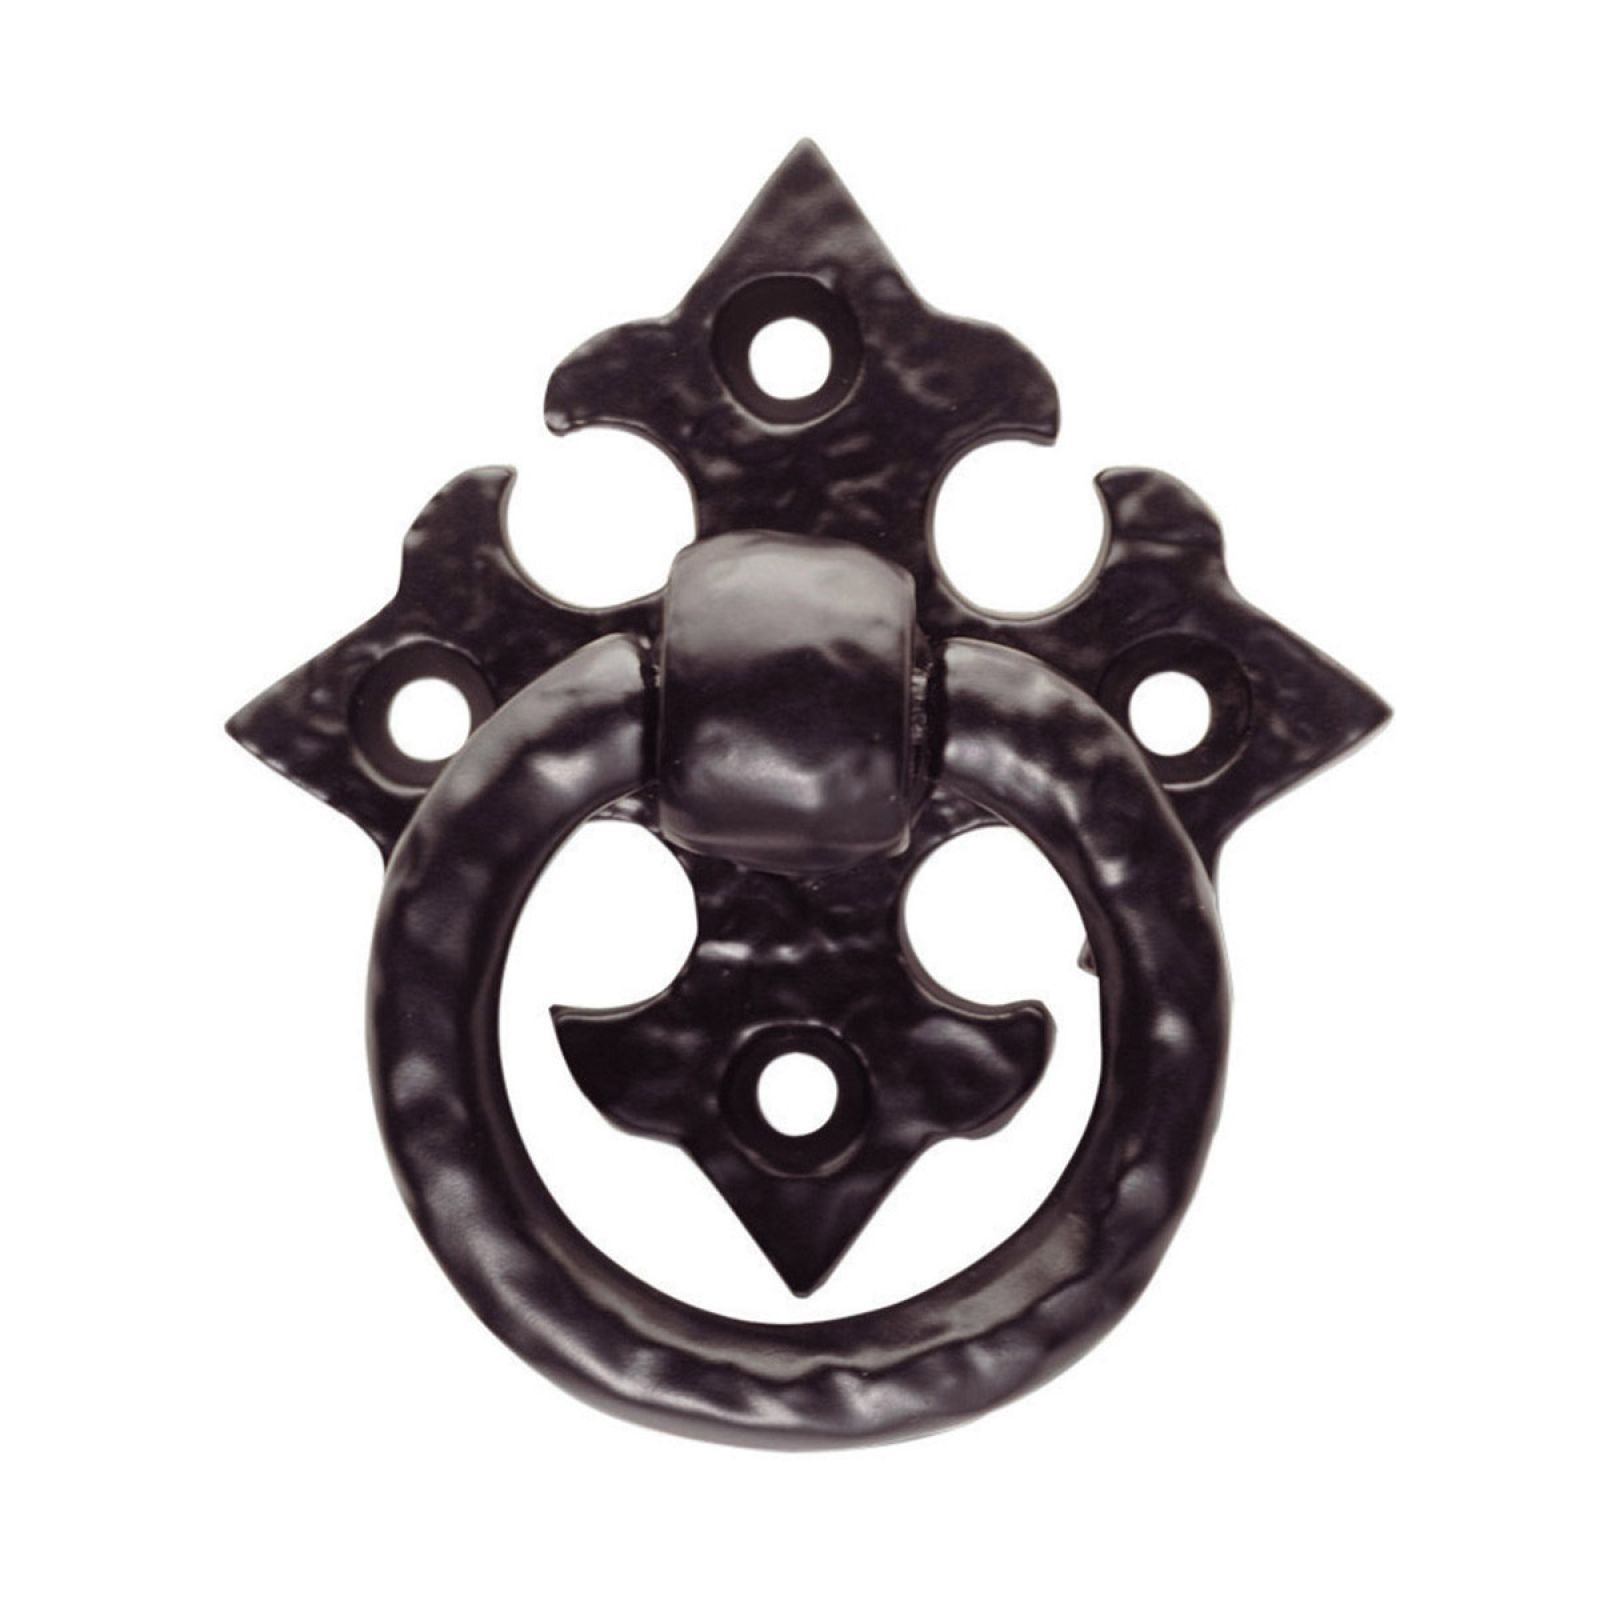 Ring pull handle on gothic cross pattern backplate